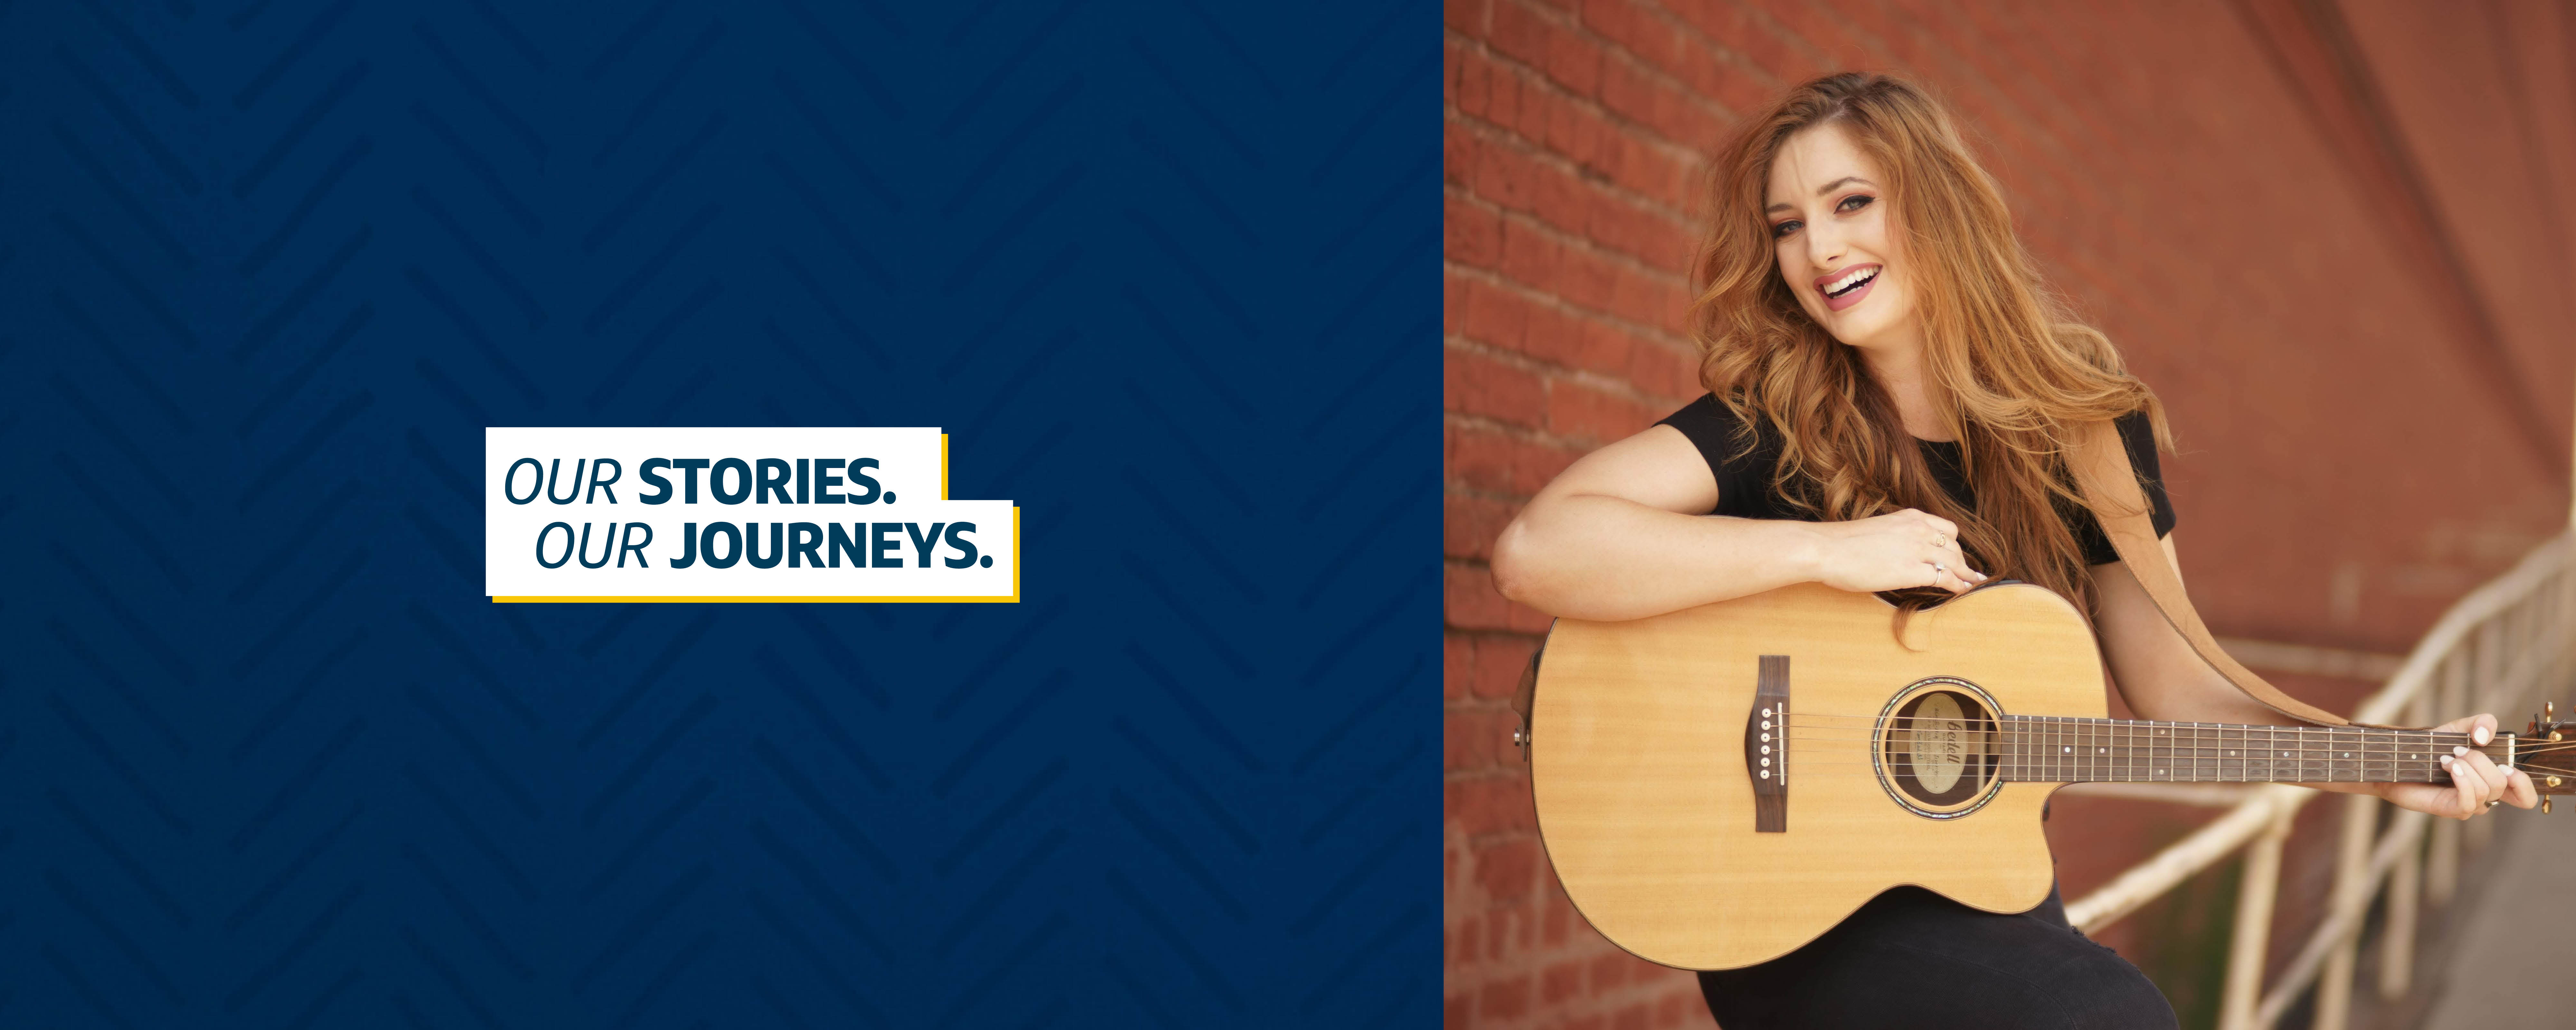 Image of Capital One associate Caitlin with her guitar, and the title 'Our Stories, Our Journeys,'' next to a dark blue background